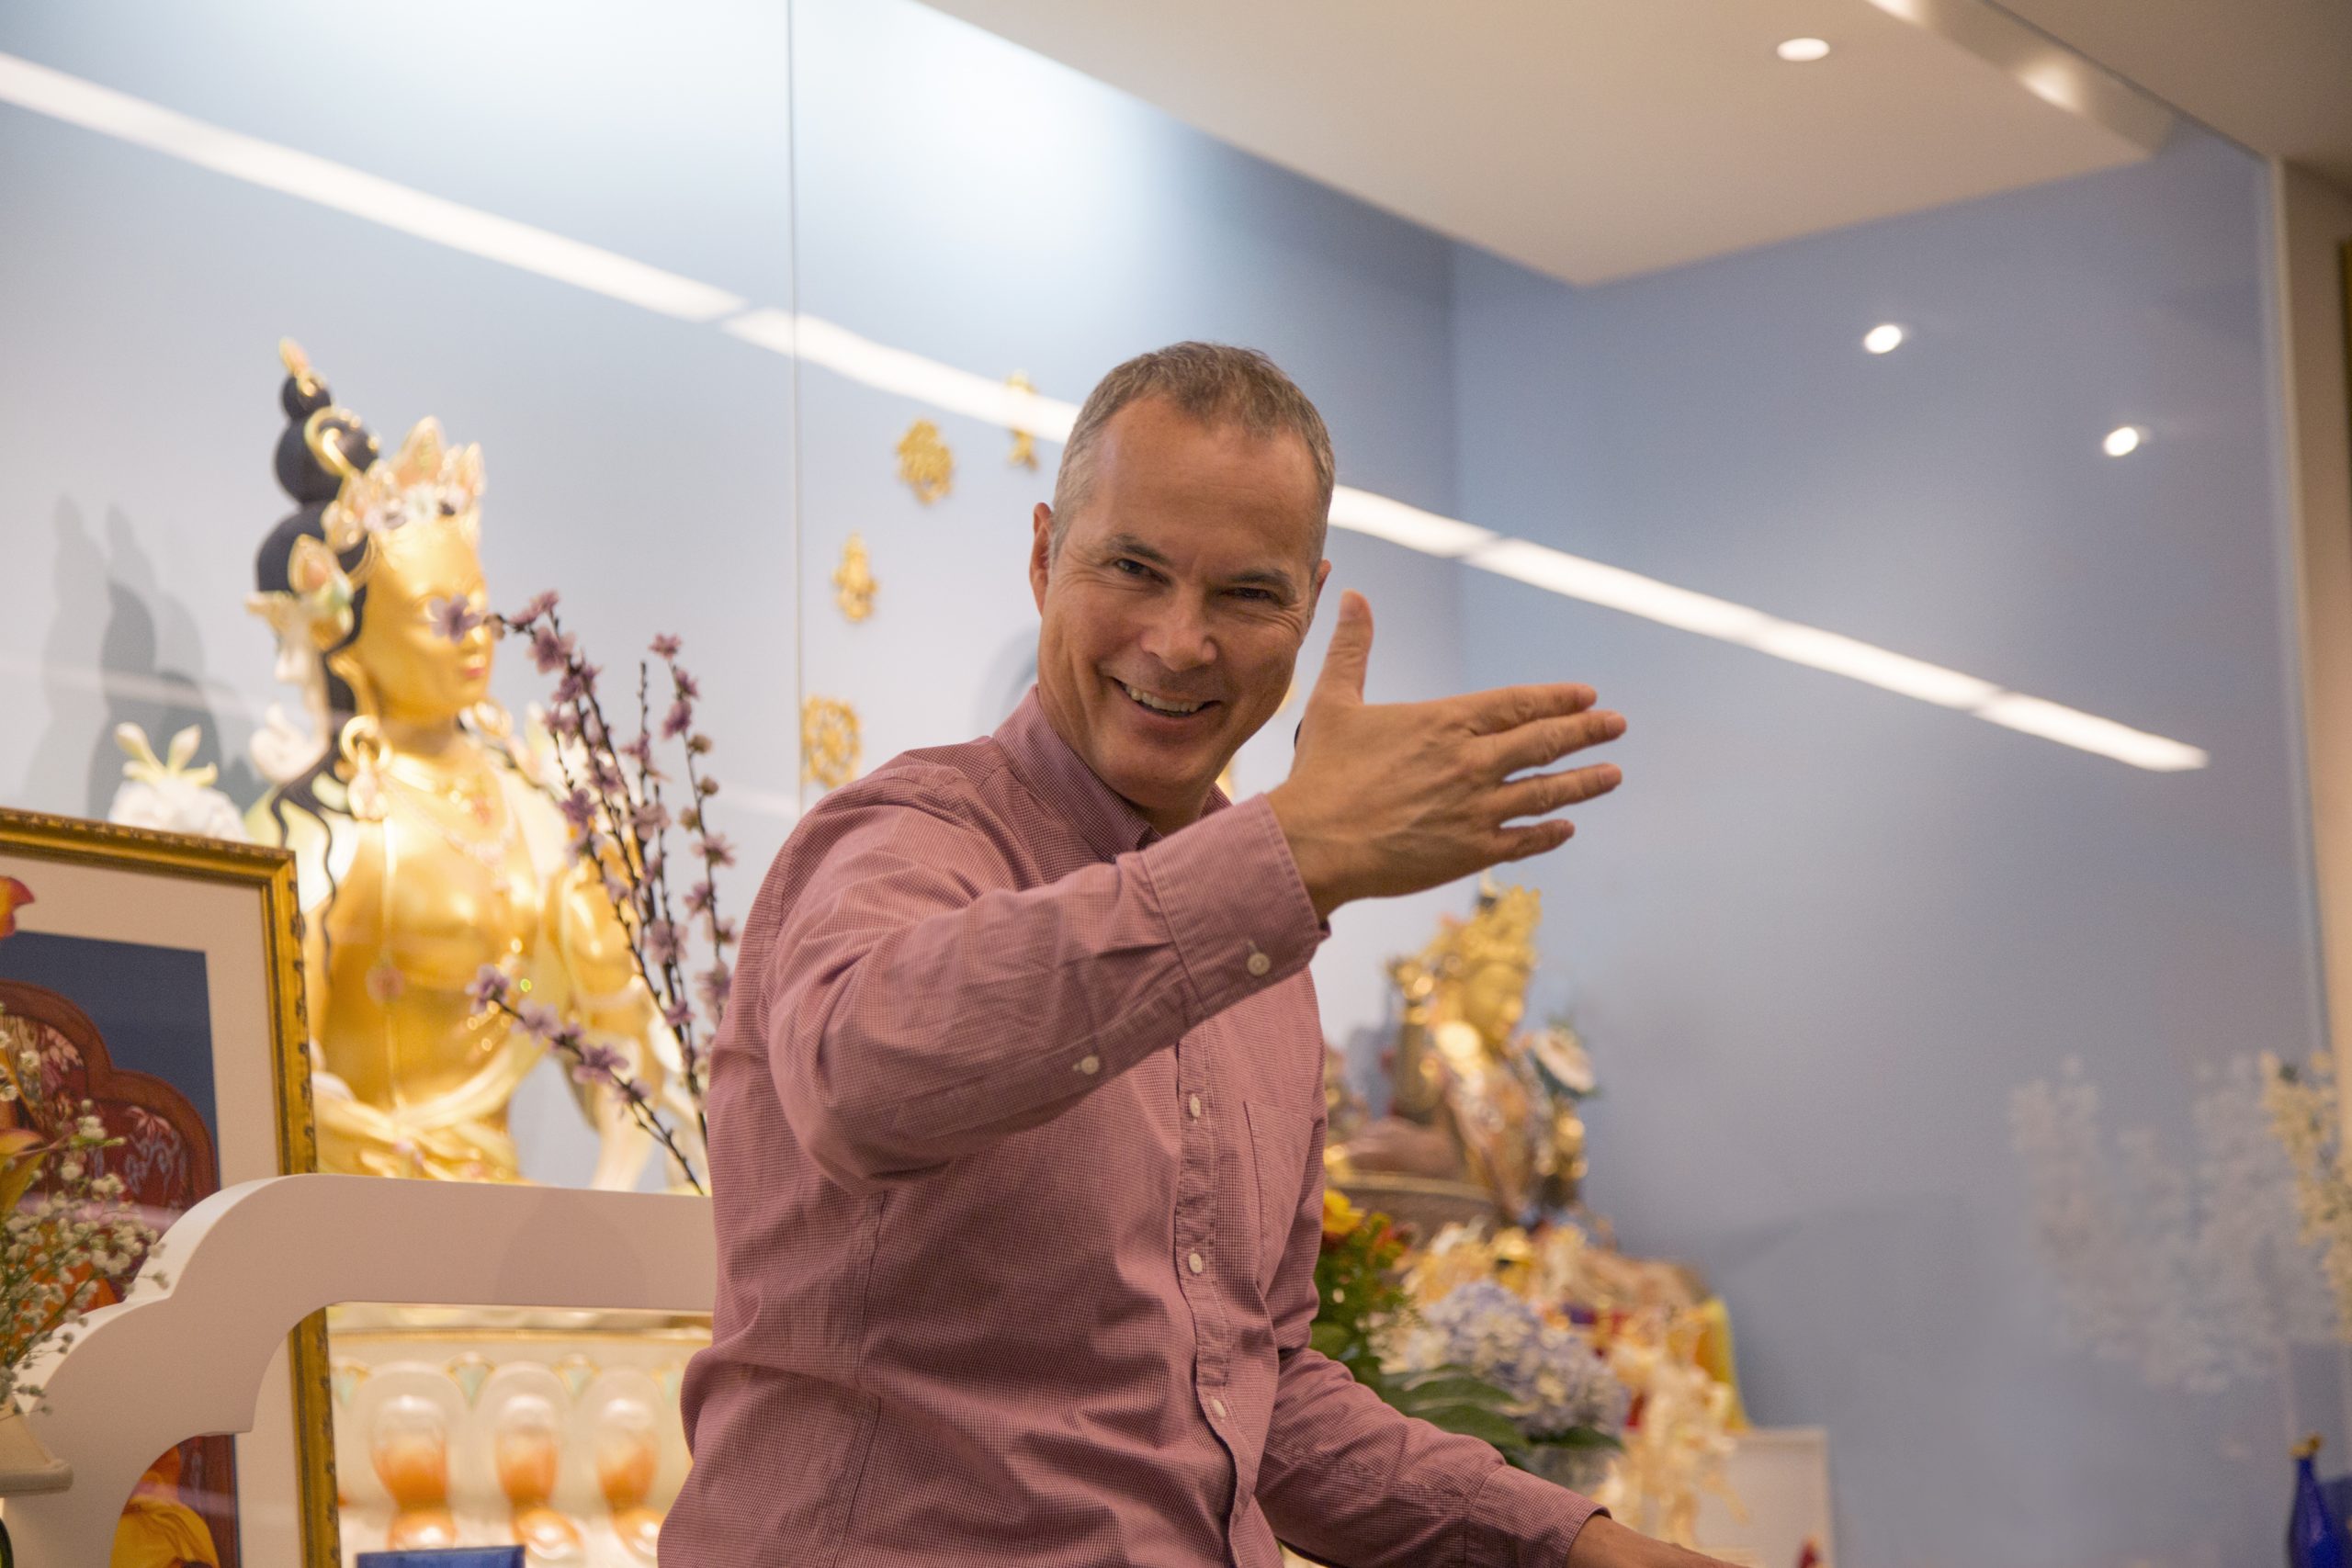 Kadam Morten is the Eastern US National Spiritual Director of the New Kadampa Tradition and Resident Teacher at Kadampa Meditation Center New York City. He has been a close disciple of Venerable Geshe Kelsang Gyatso for over 35 years.